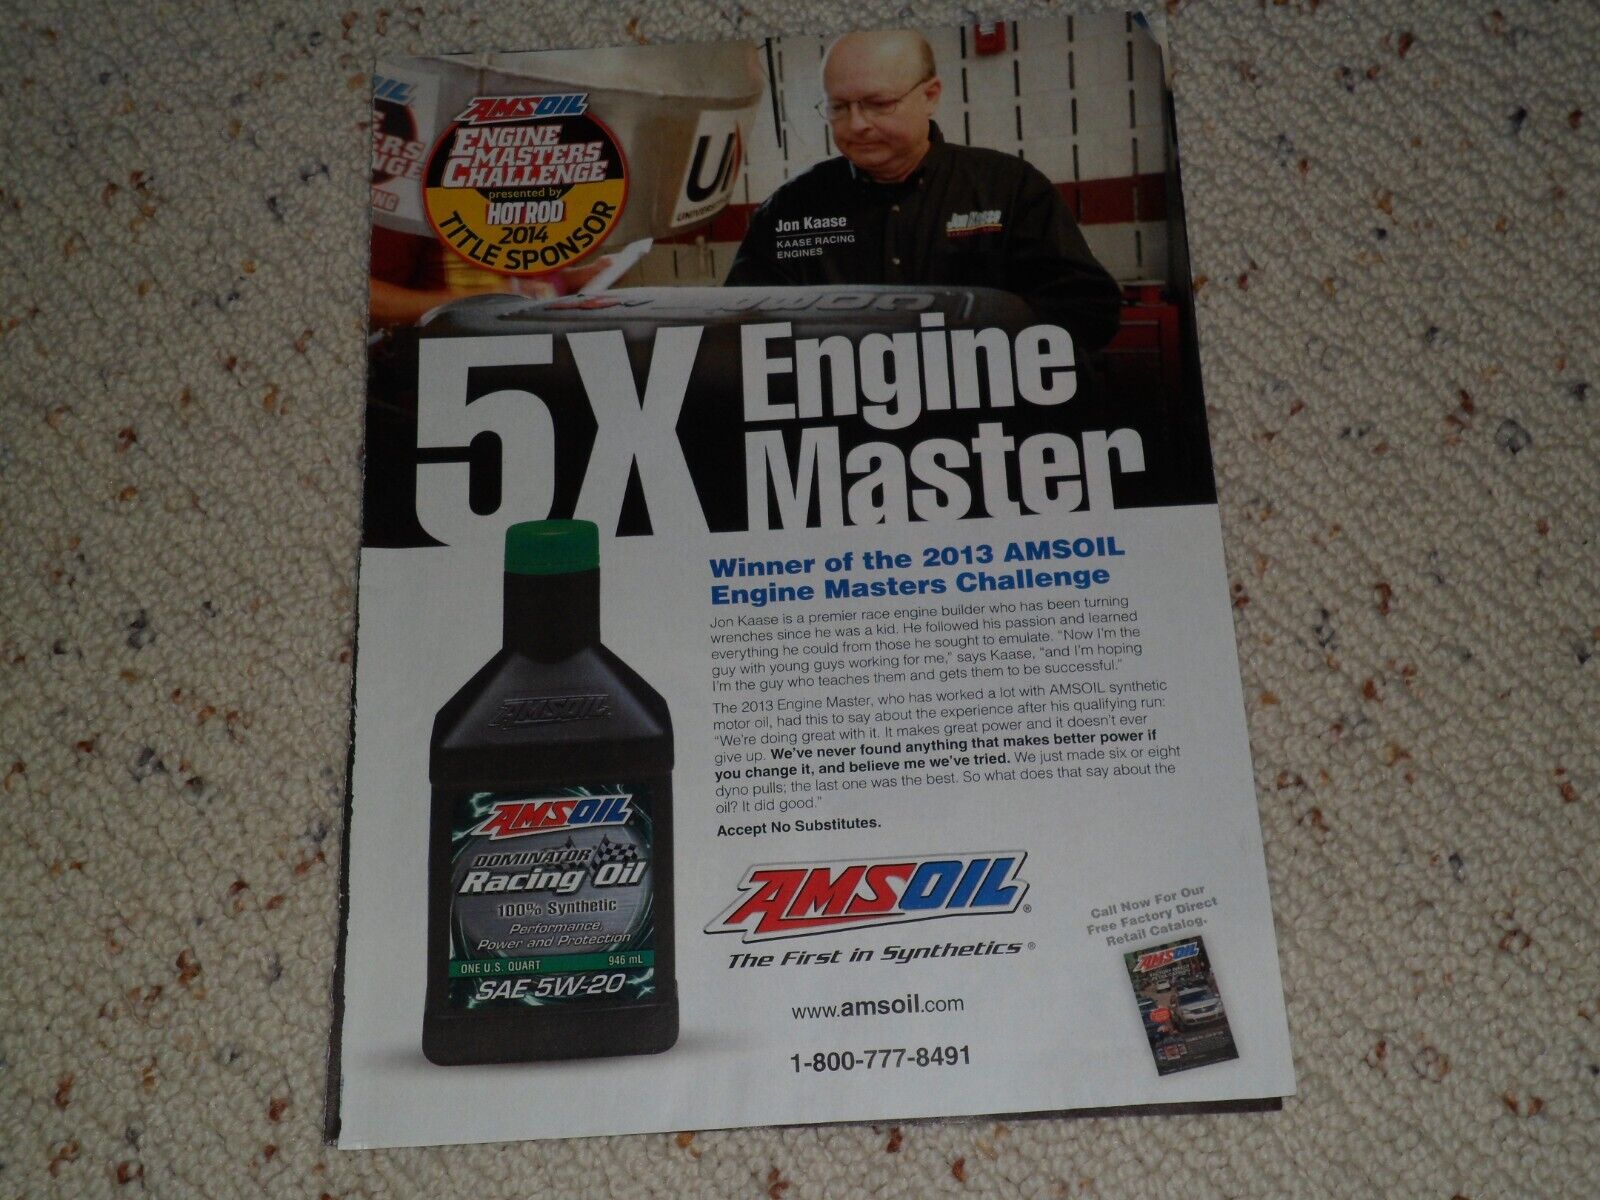 2014 AMSOIL AD / ARTICLE